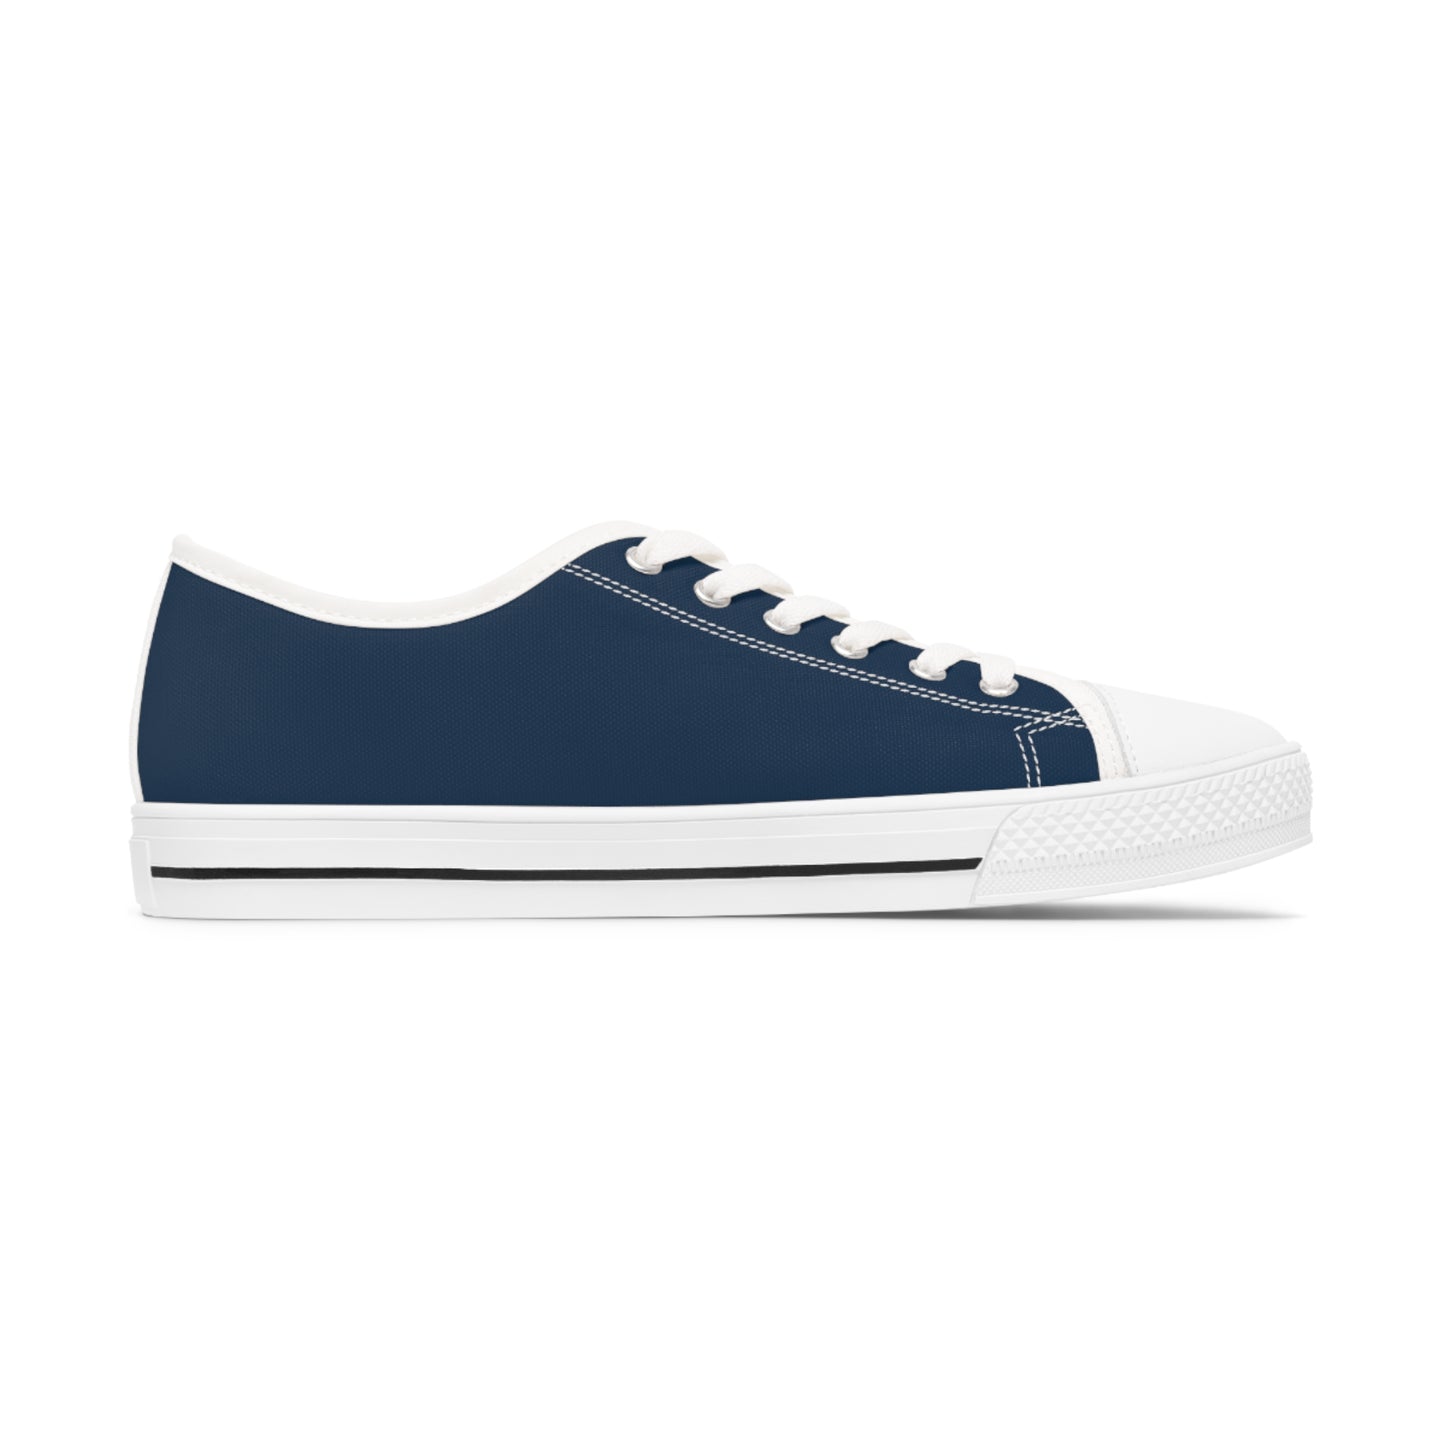 Women's Canvas Low Top Solid Color Sneakers - Ink Blue US 12 White sole